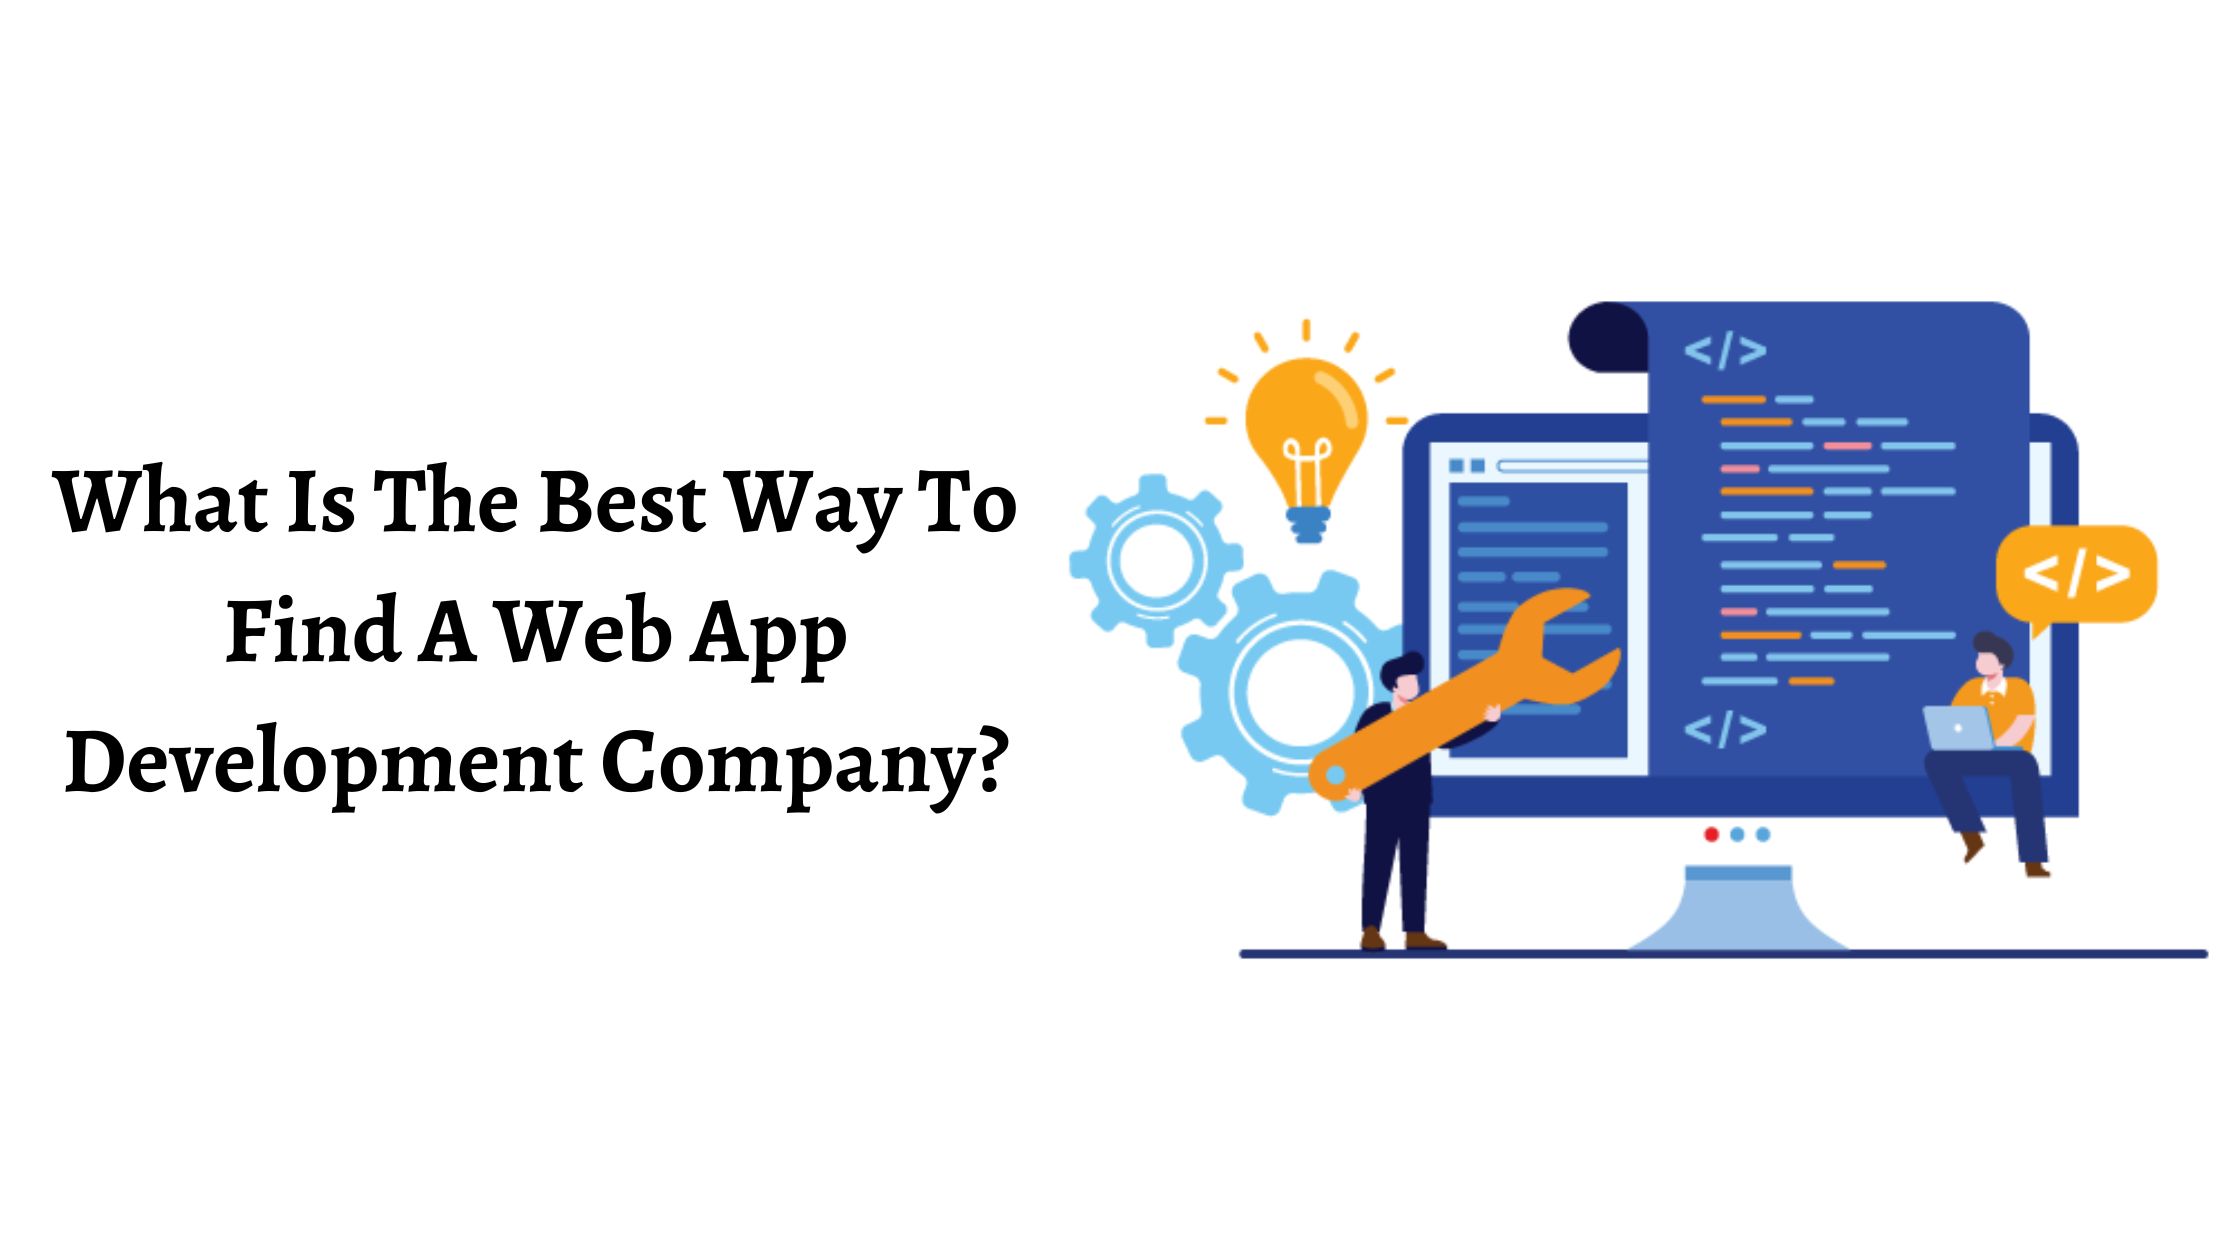 What Is The Best Way To Find A Web App Development Company